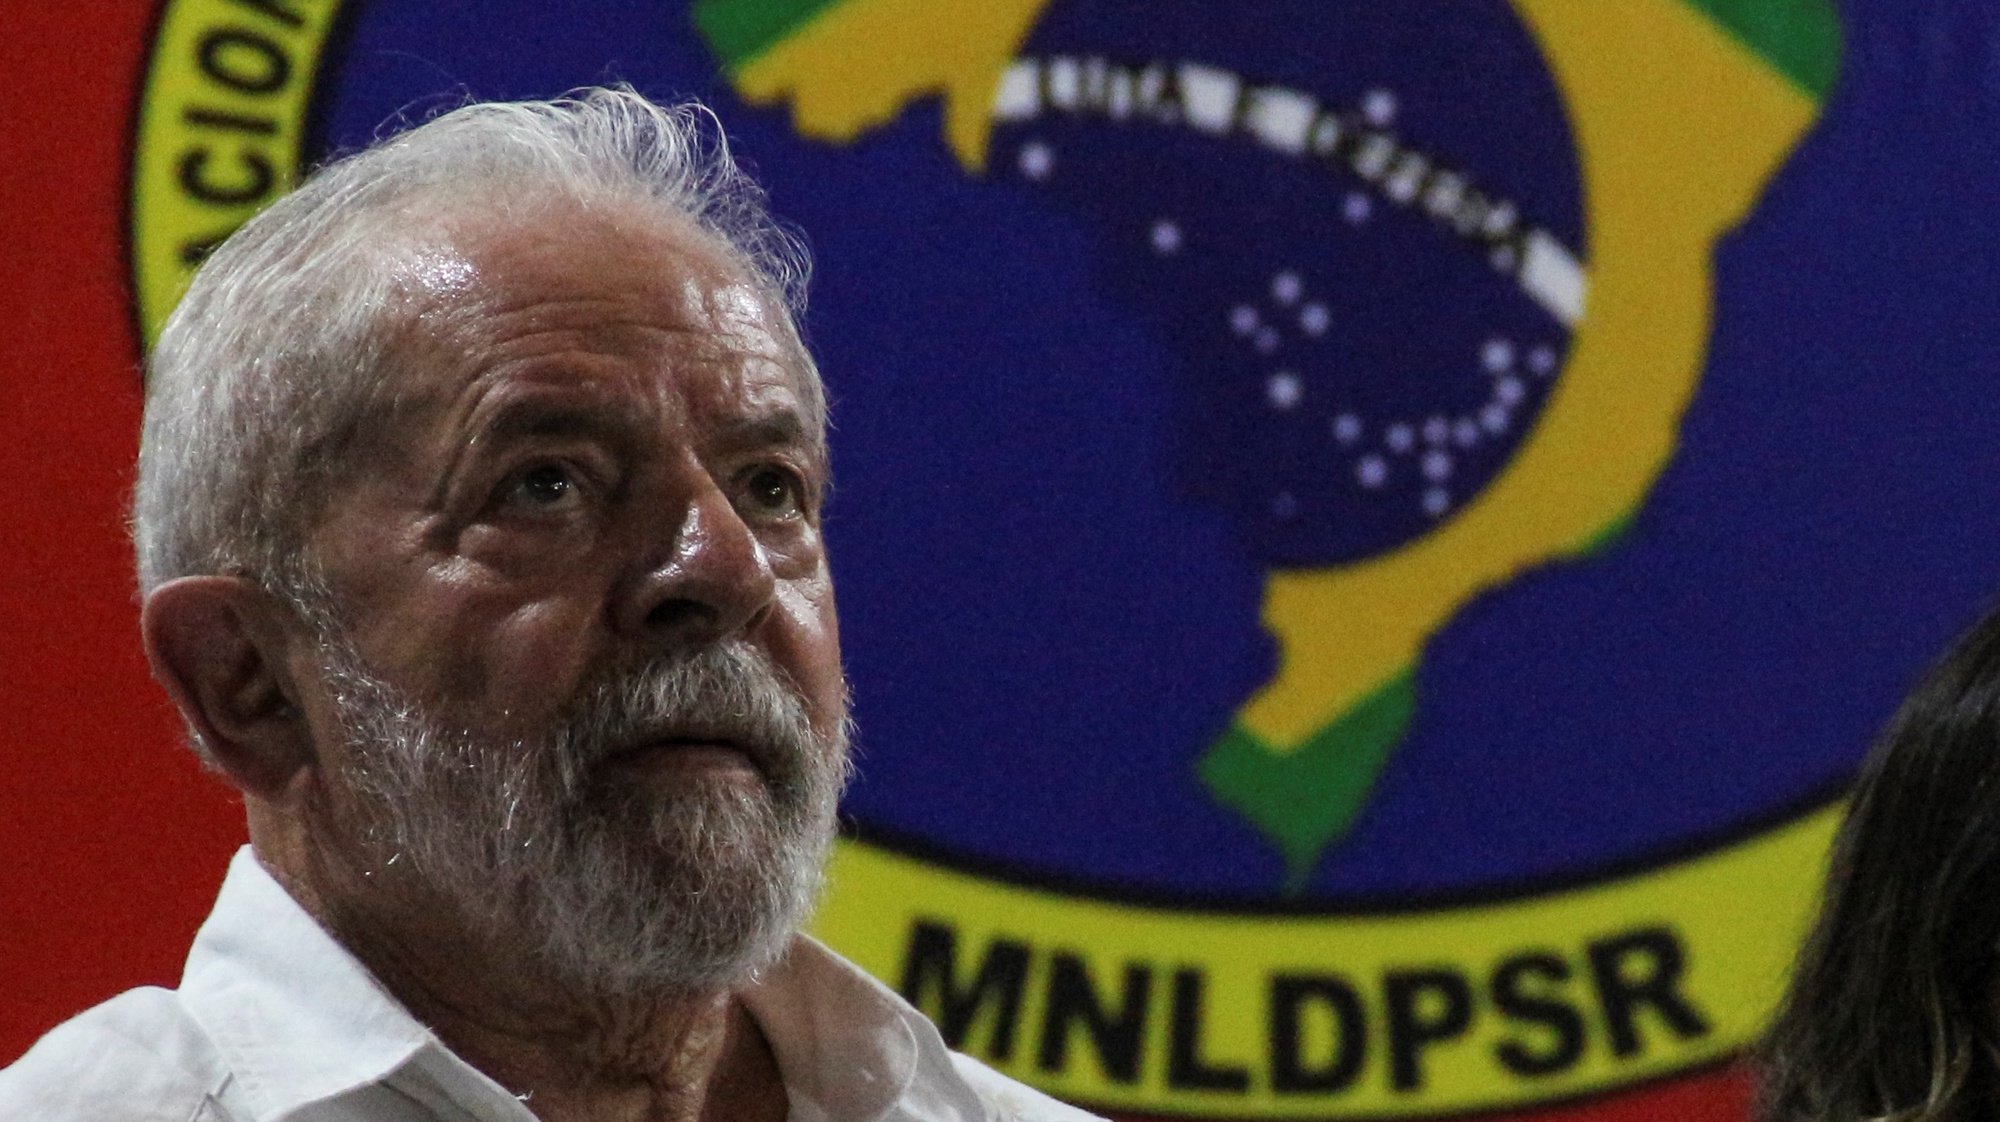 epa09654513 Former president Luiz Inacio Lula da Silva attends a meeting with homeless groups in Sao Paulo, Brazil, 22 December 2021. da Silva is a front runner in the 2022 elections in Brazil.  EPA/Carlos Meneses